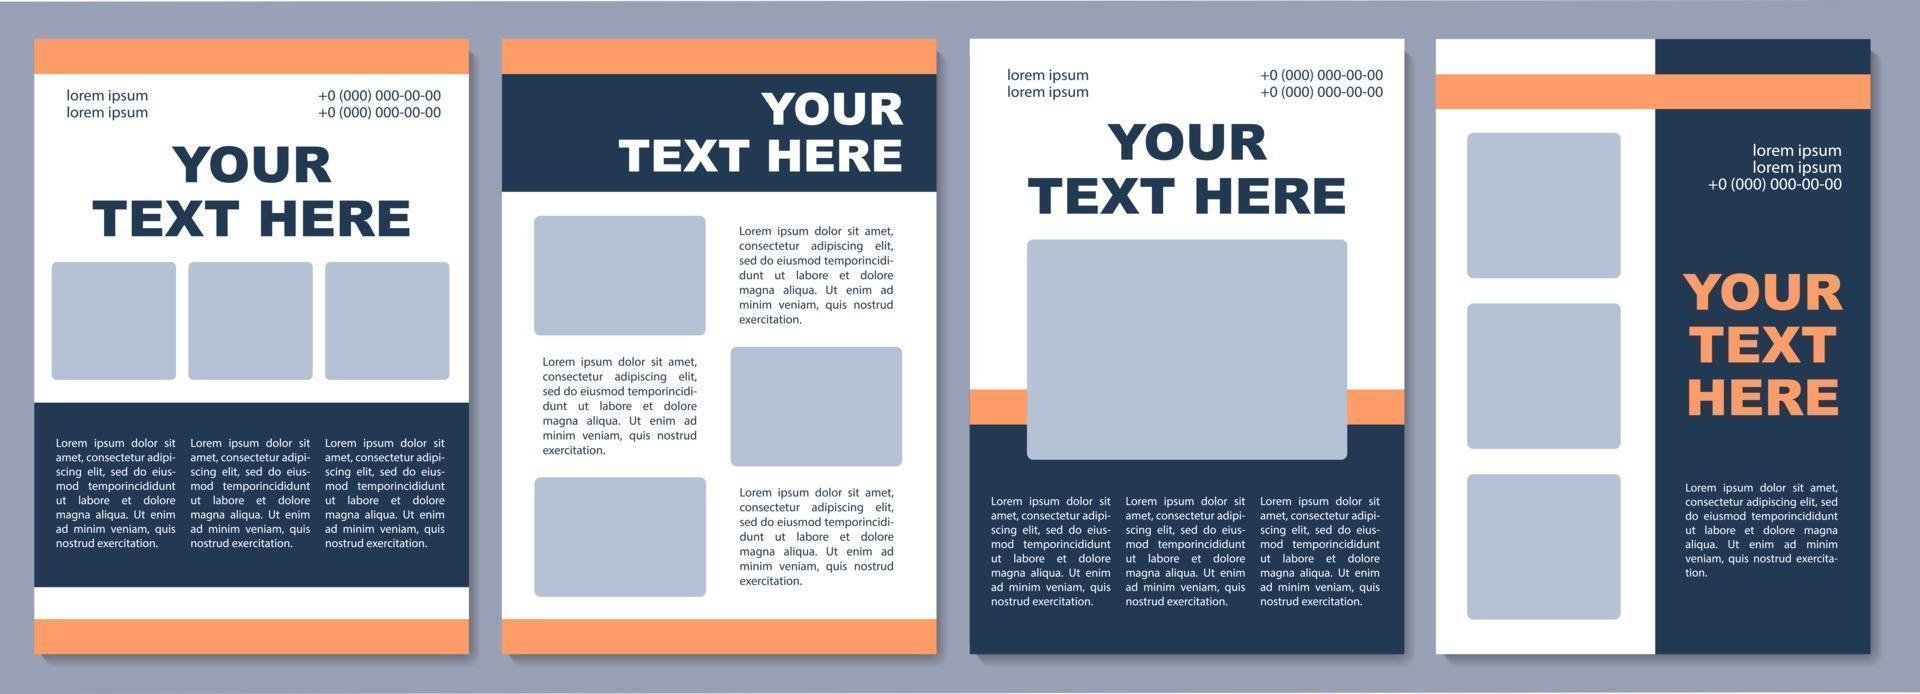 Business proposal brochure template. Marketing material. Flyer, booklet, leaflet print, cover design with copy space. Your text here. Vector layouts for magazines, annual reports, advertising posters